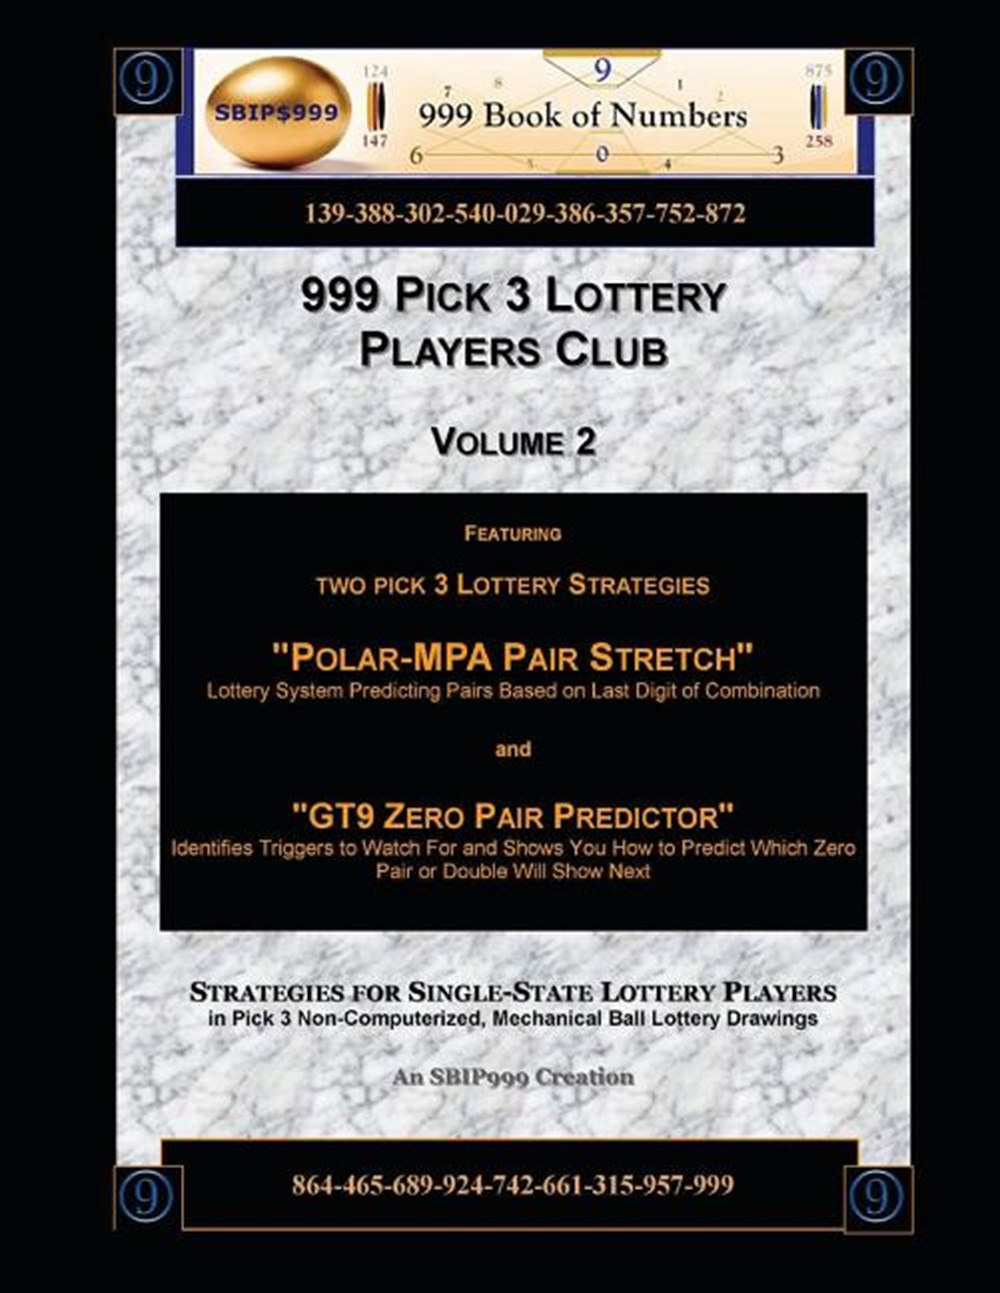 999 Pick 3 Lottery Players Club Volume 2: Featuring "Polar MPA Pair Stretch" and "GT9 Zero Pair Pred